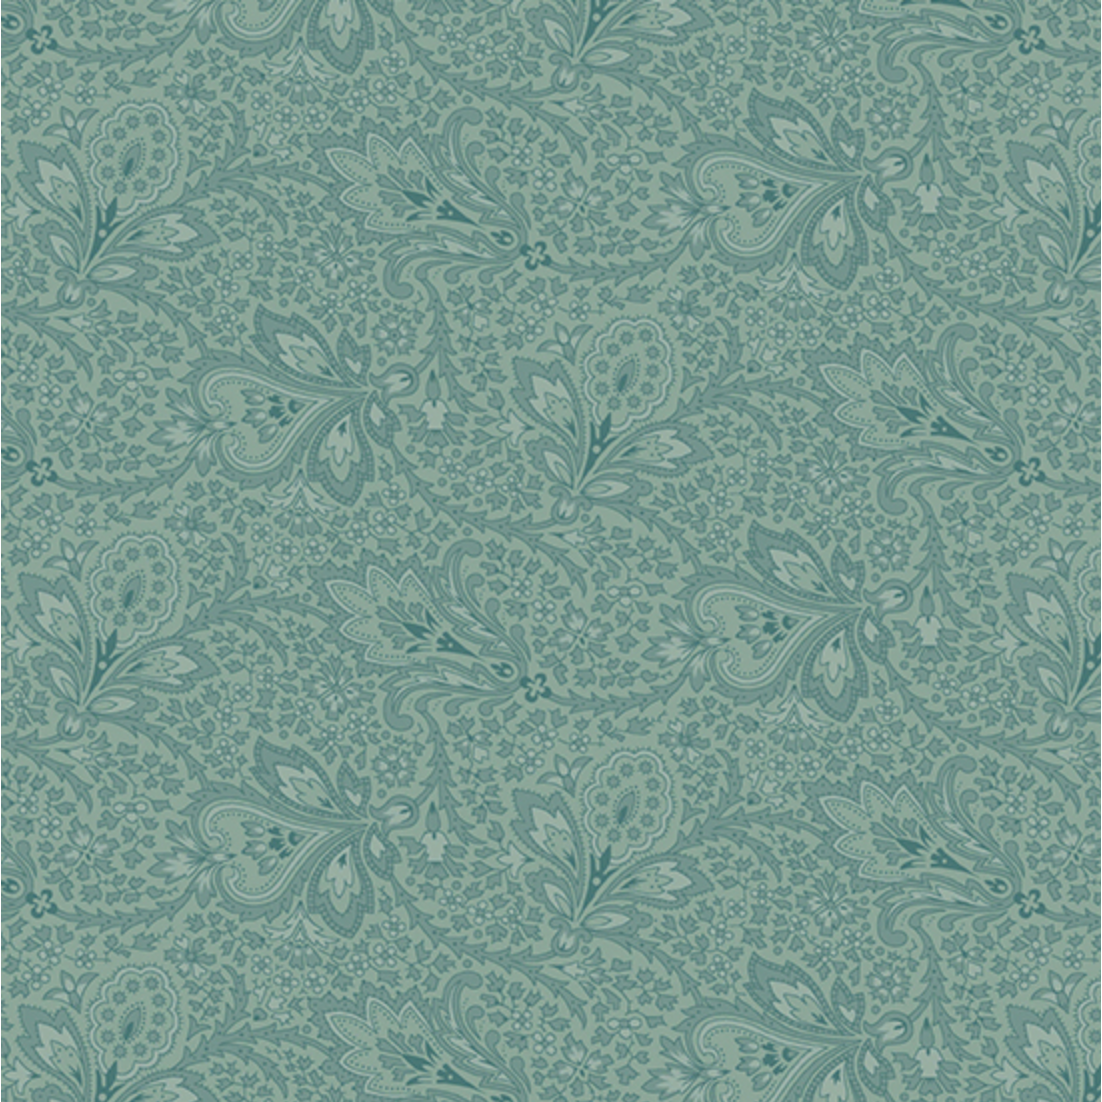 Tradewinds ~ A 811 T Paisley